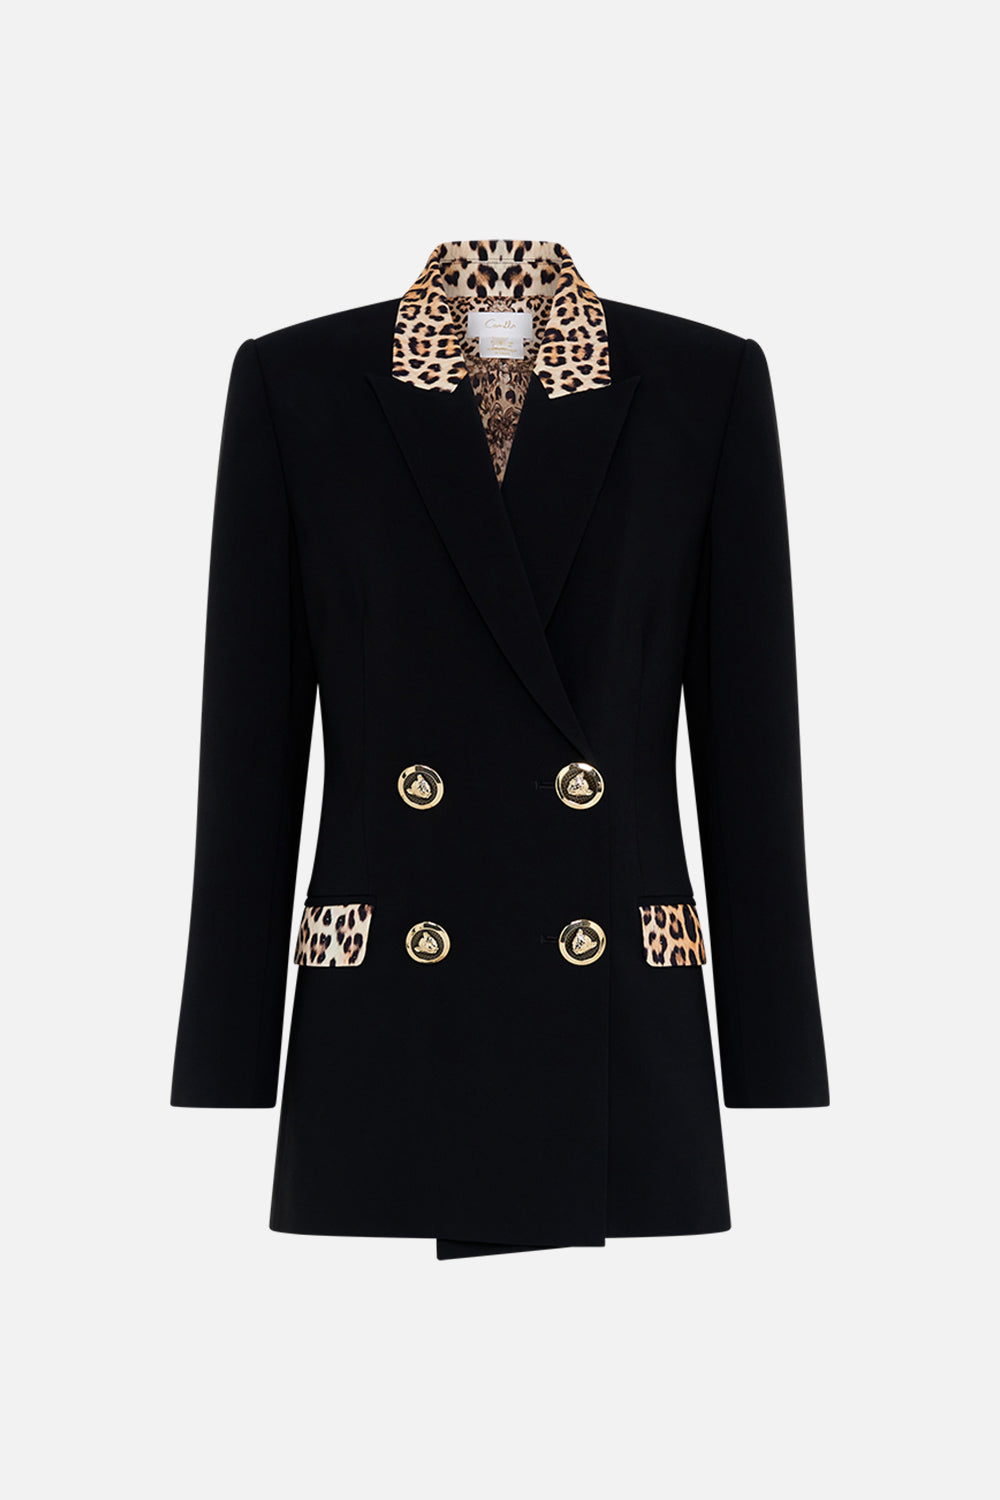 CAMILLA tailored double breasted black jacket in Standing Ovation print